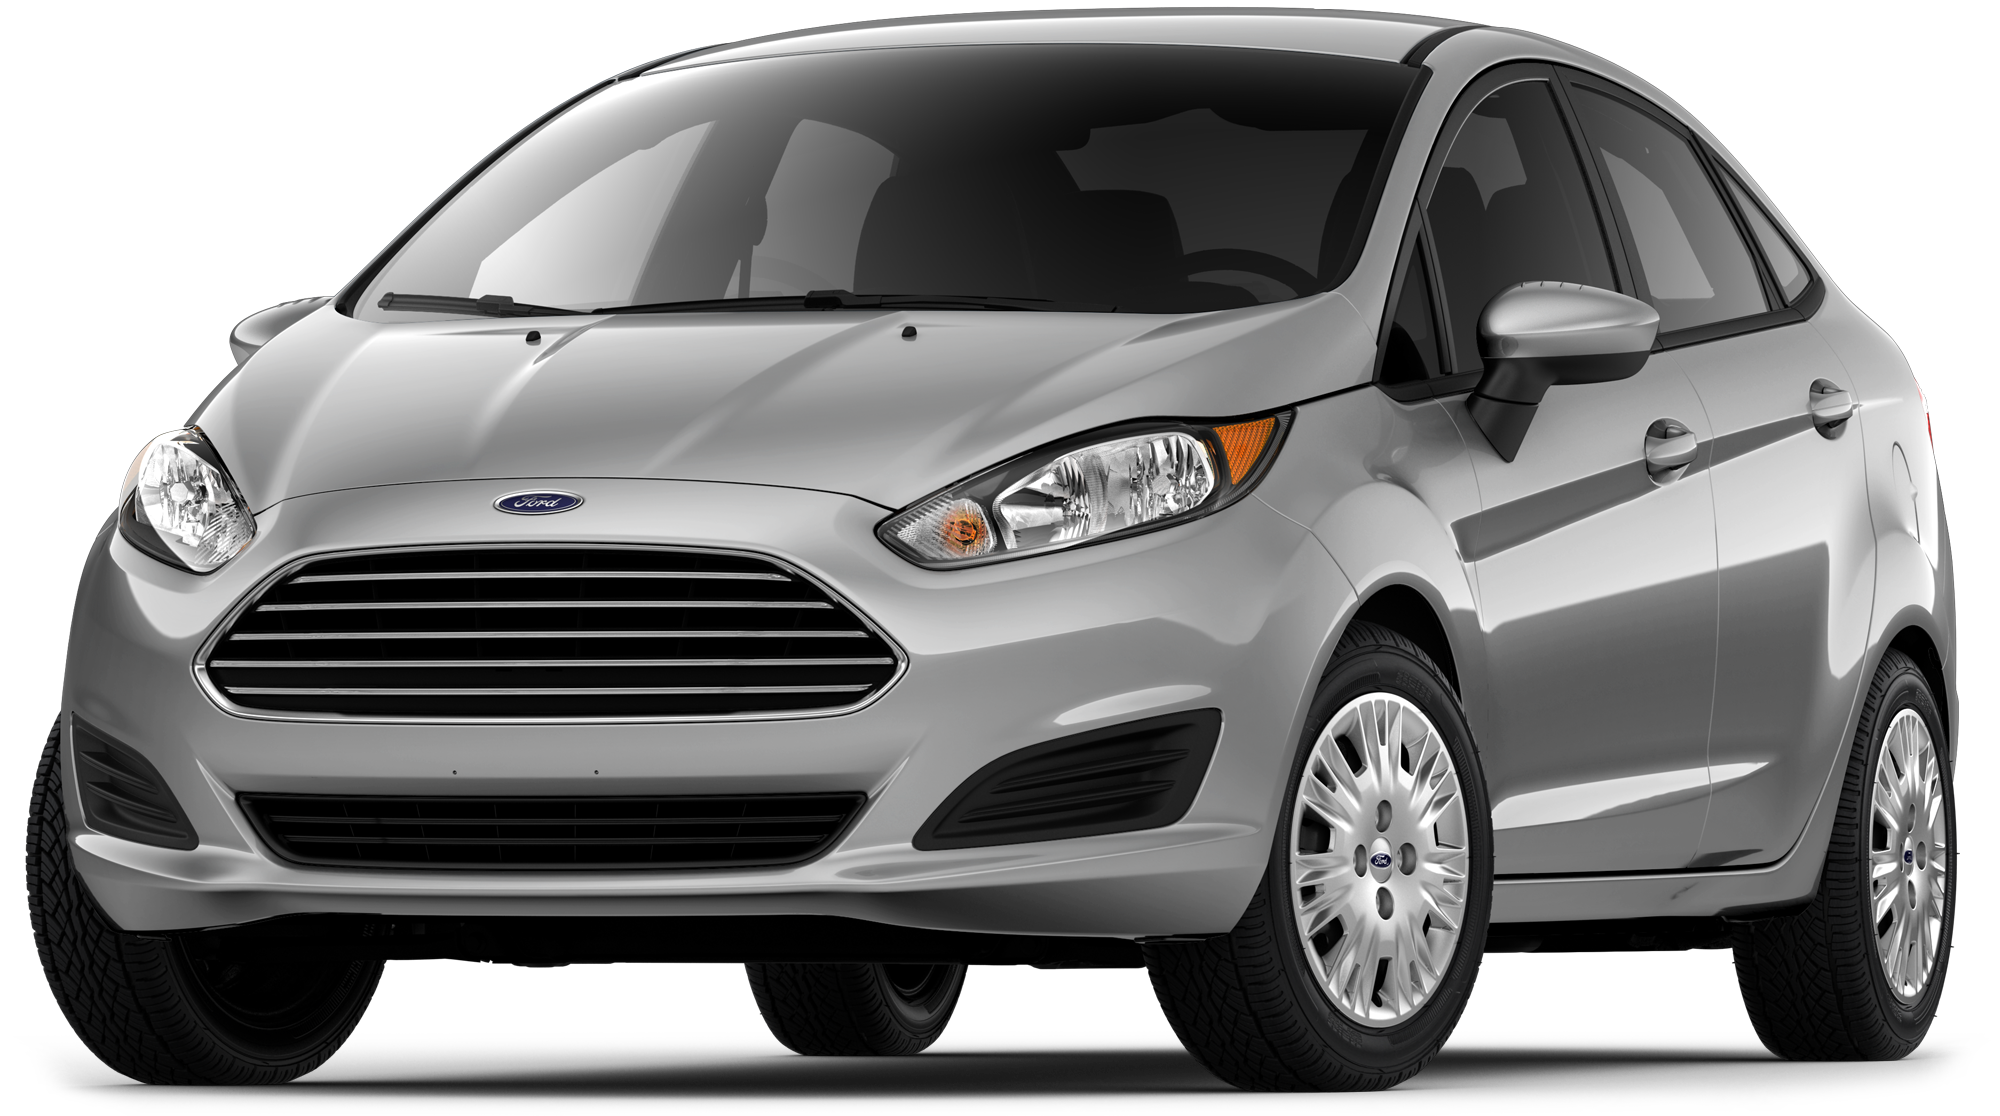 Ford Incentive Offers